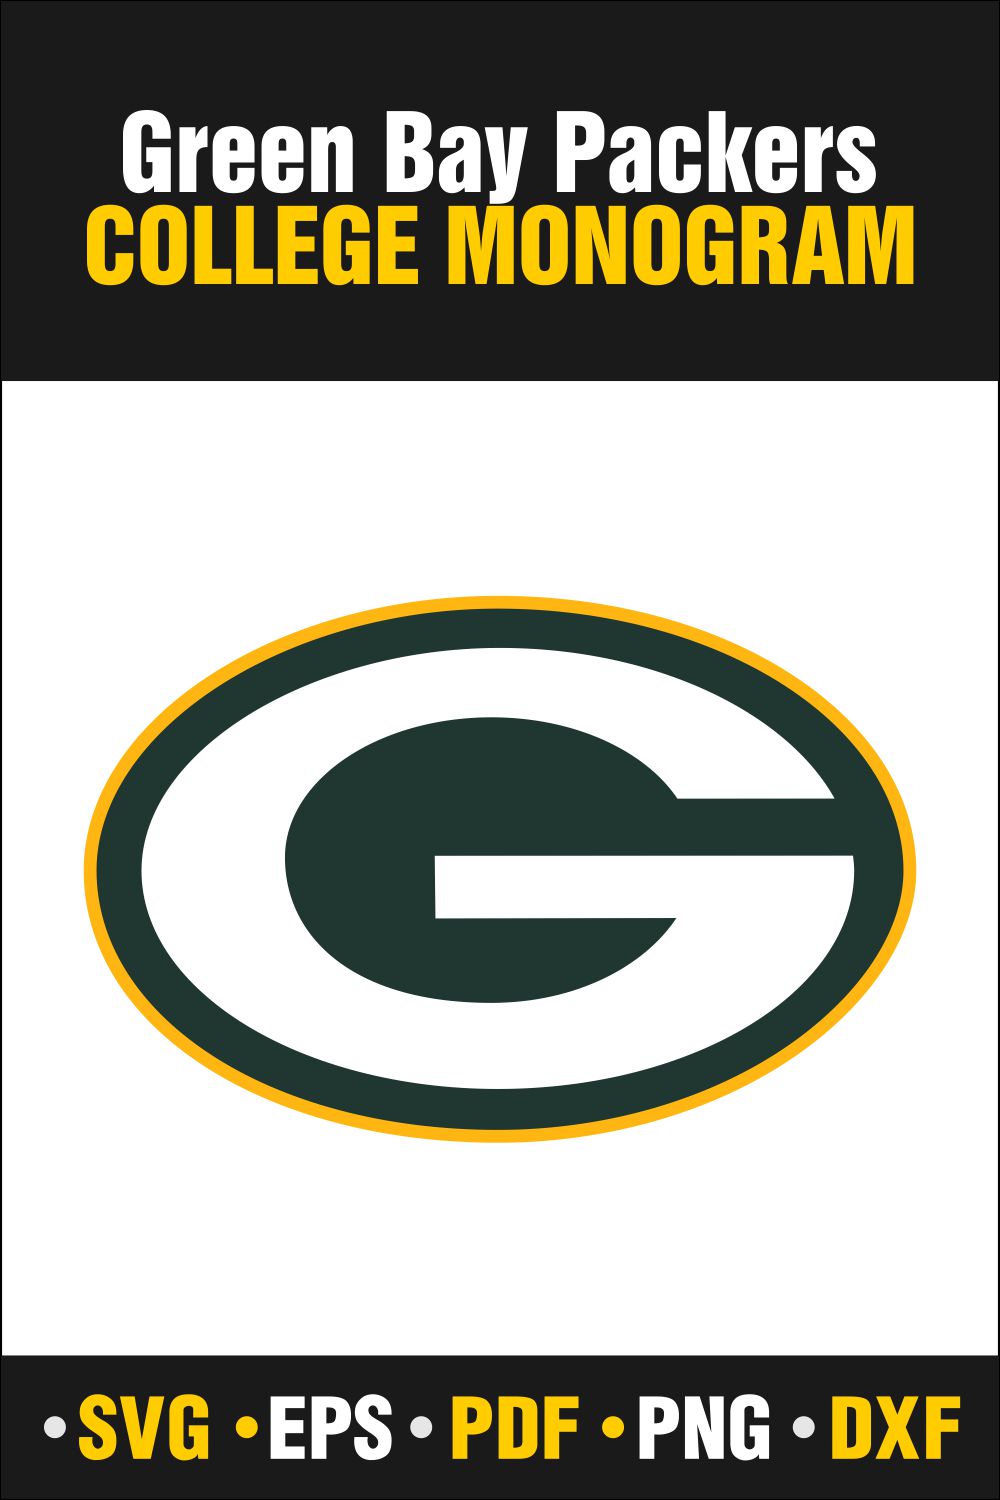 Green Bay Packers SVG, PDF, PNG, DXF, EPS - Only $2 pinterest preview image.